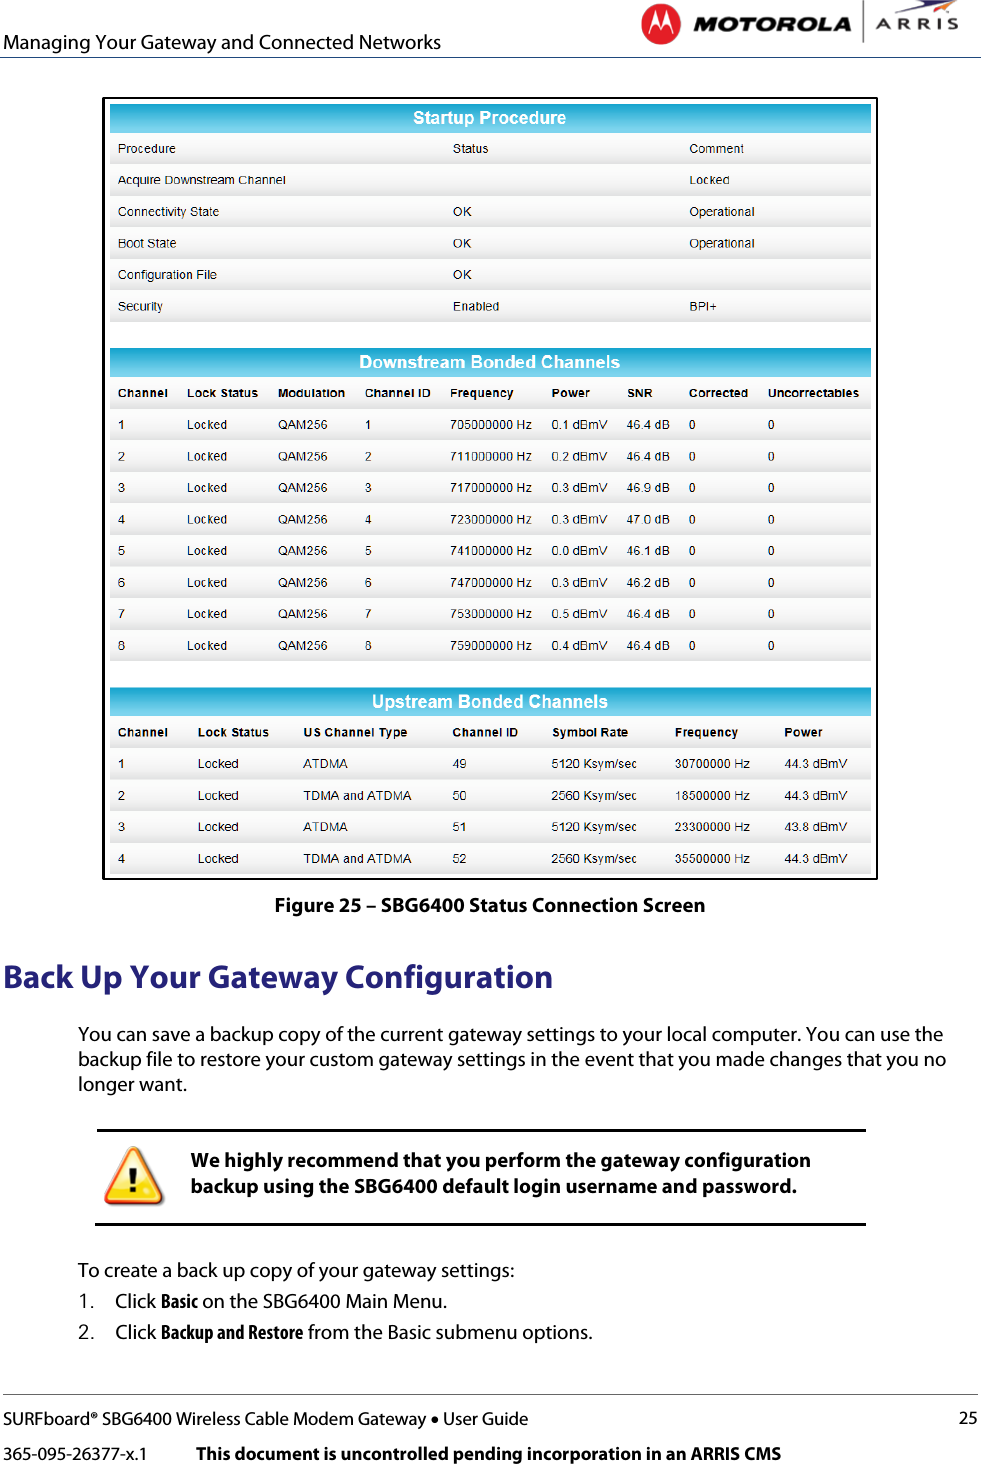 Managing Your Gateway and Connected Networks   SURFboard® SBG6400 Wireless Cable Modem Gateway • User Guide 25 365-095-26377-x.1            This document is uncontrolled pending incorporation in an ARRIS CMS   Figure 25 – SBG6400 Status Connection Screen Back Up Your Gateway Configuration You can save a backup copy of the current gateway settings to your local computer. You can use the backup file to restore your custom gateway settings in the event that you made changes that you no longer want.   We highly recommend that you perform the gateway configuration backup using the SBG6400 default login username and password.  To create a back up copy of your gateway settings: 1. Click Basic on the SBG6400 Main Menu. 2. Click Backup and Restore from the Basic submenu options. 